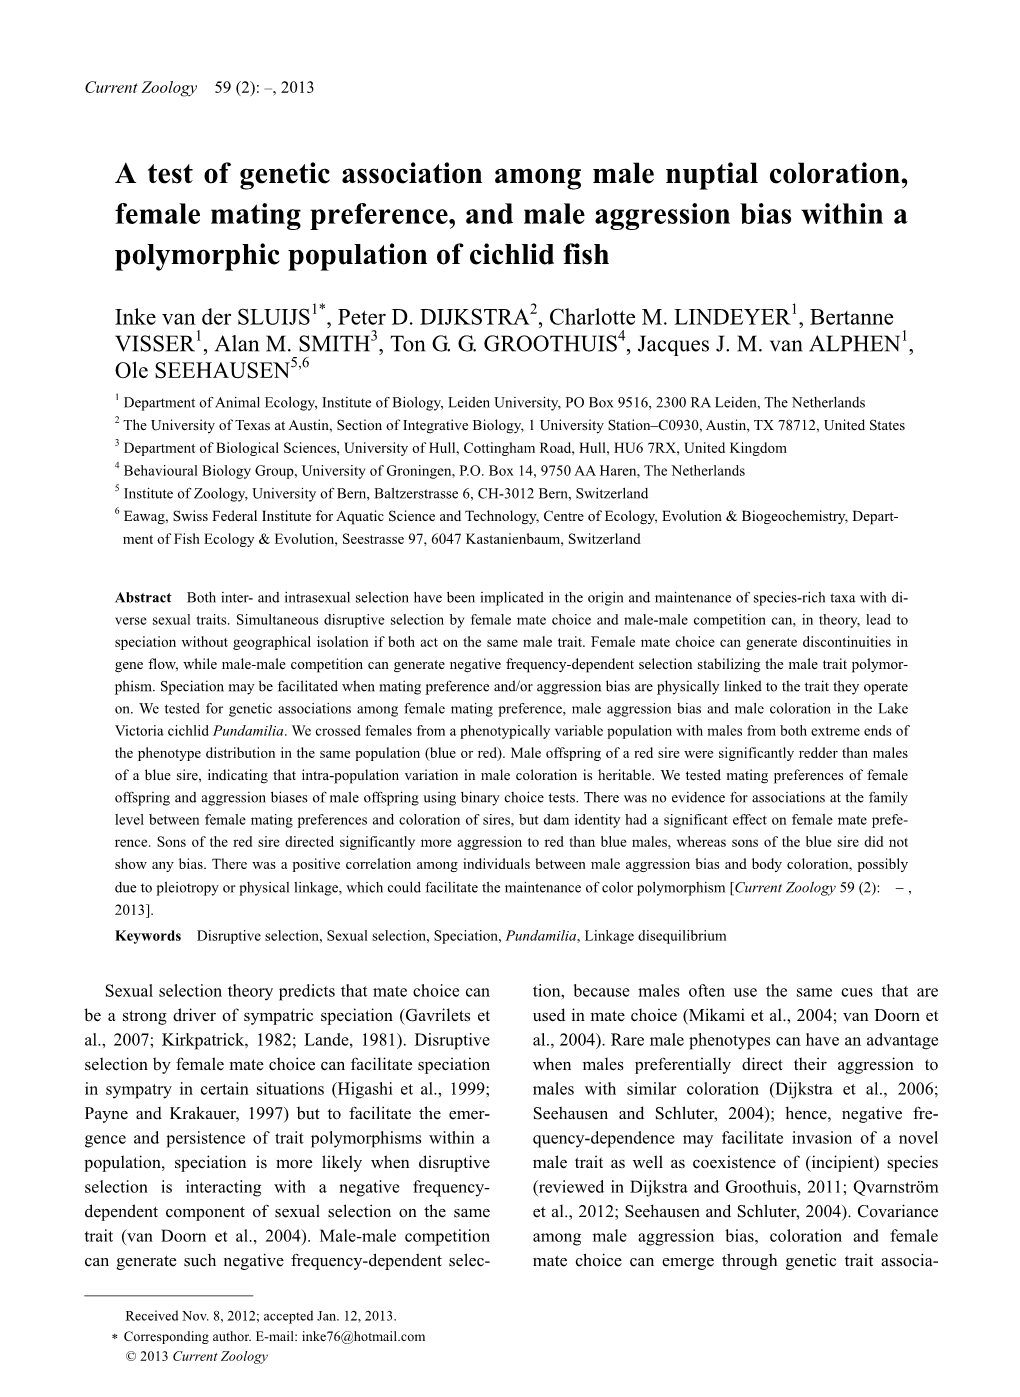 A Test of Genetic Association Among Male Nuptial Coloration, Female Mating Preference, and Male Aggression Bias Within a Polymorphic Population of Cichlid Fish